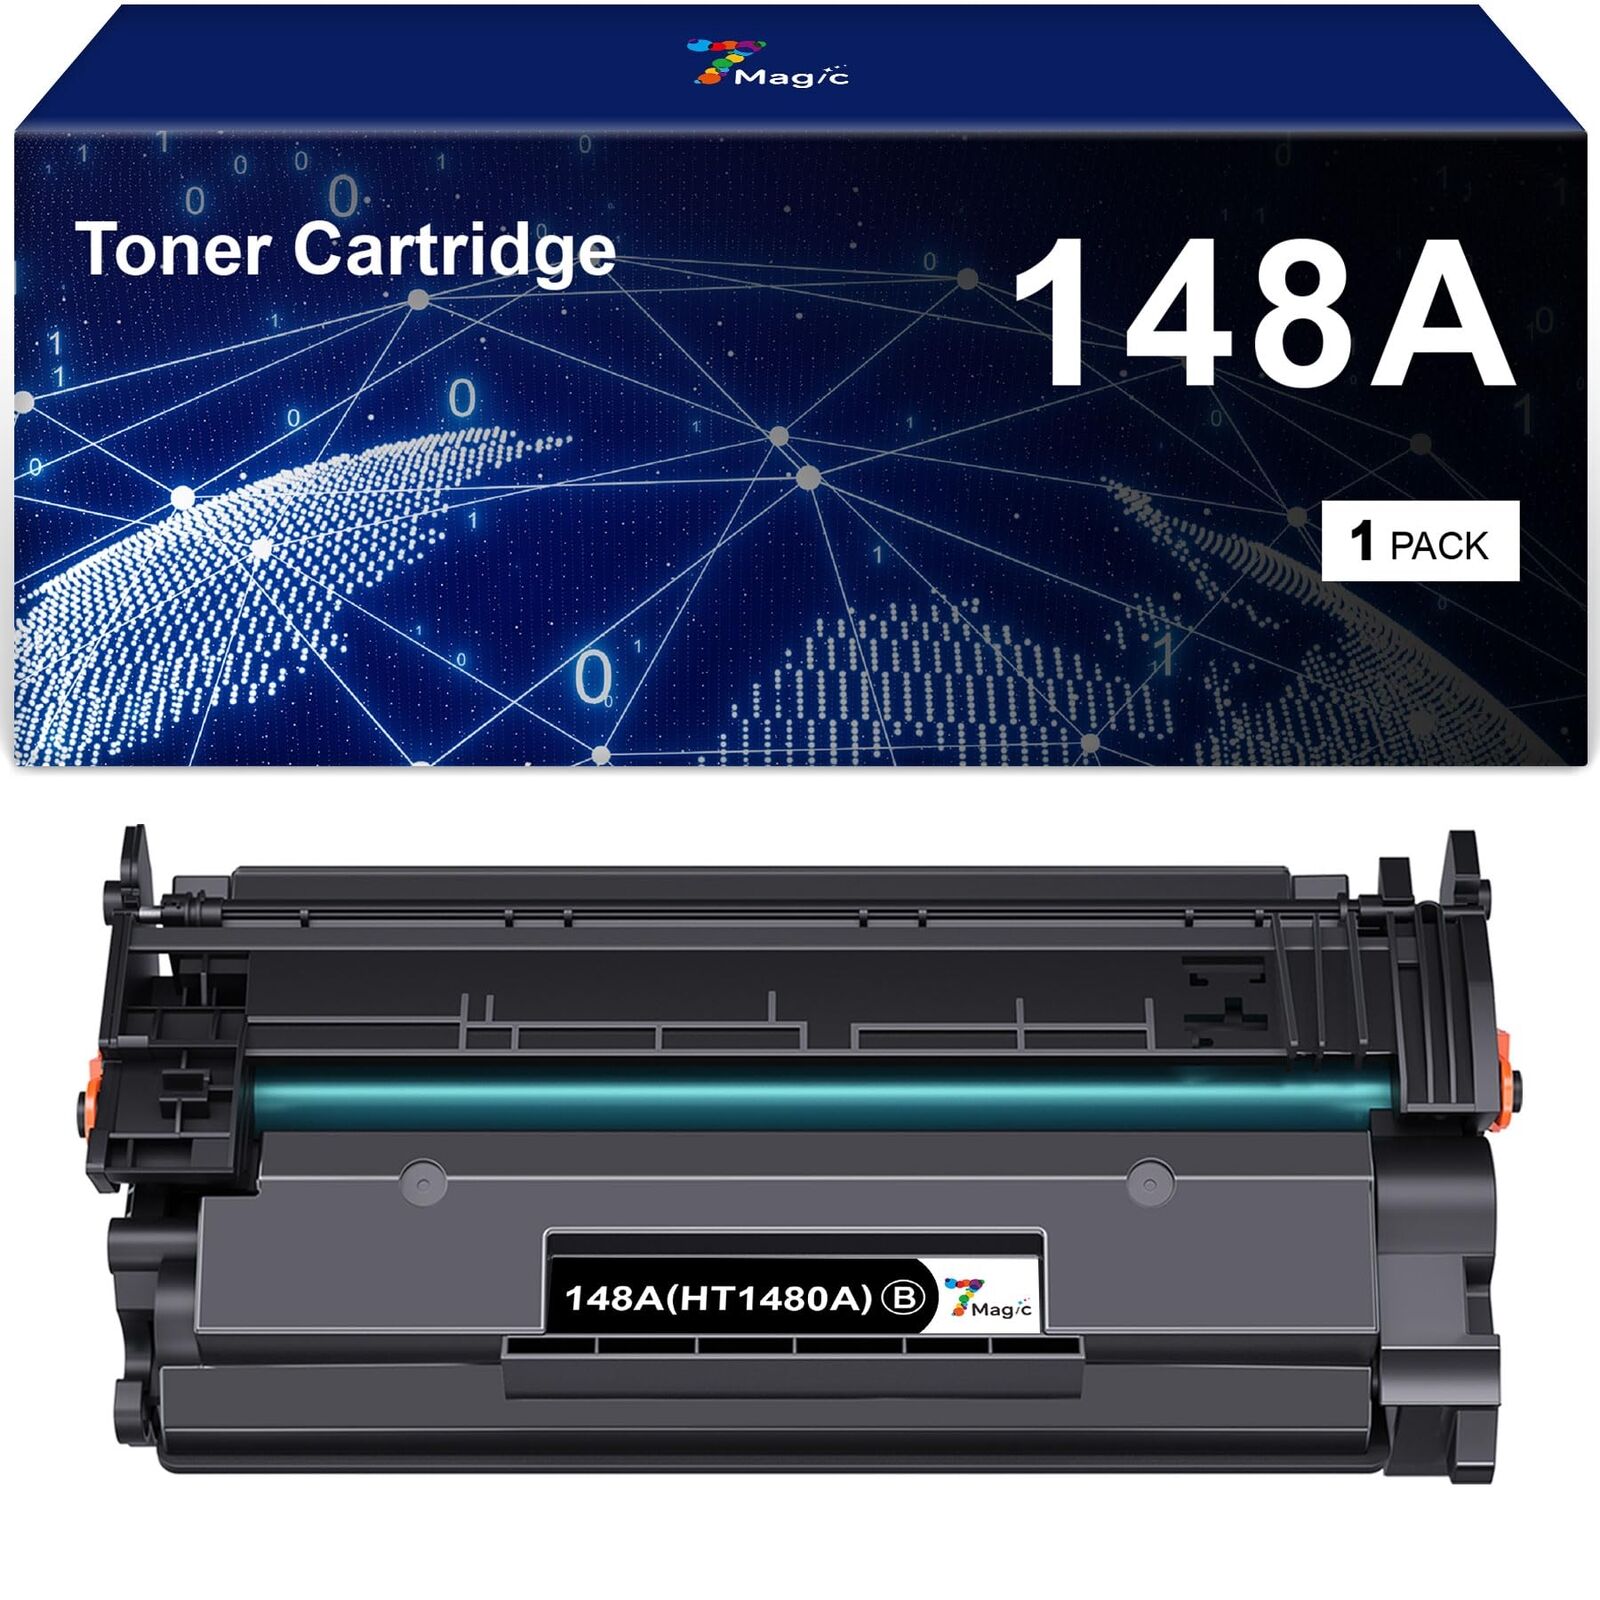 7Magic Compatible Toner Cartridge Replacement for HP 148A 148X W1480A W1480X ...